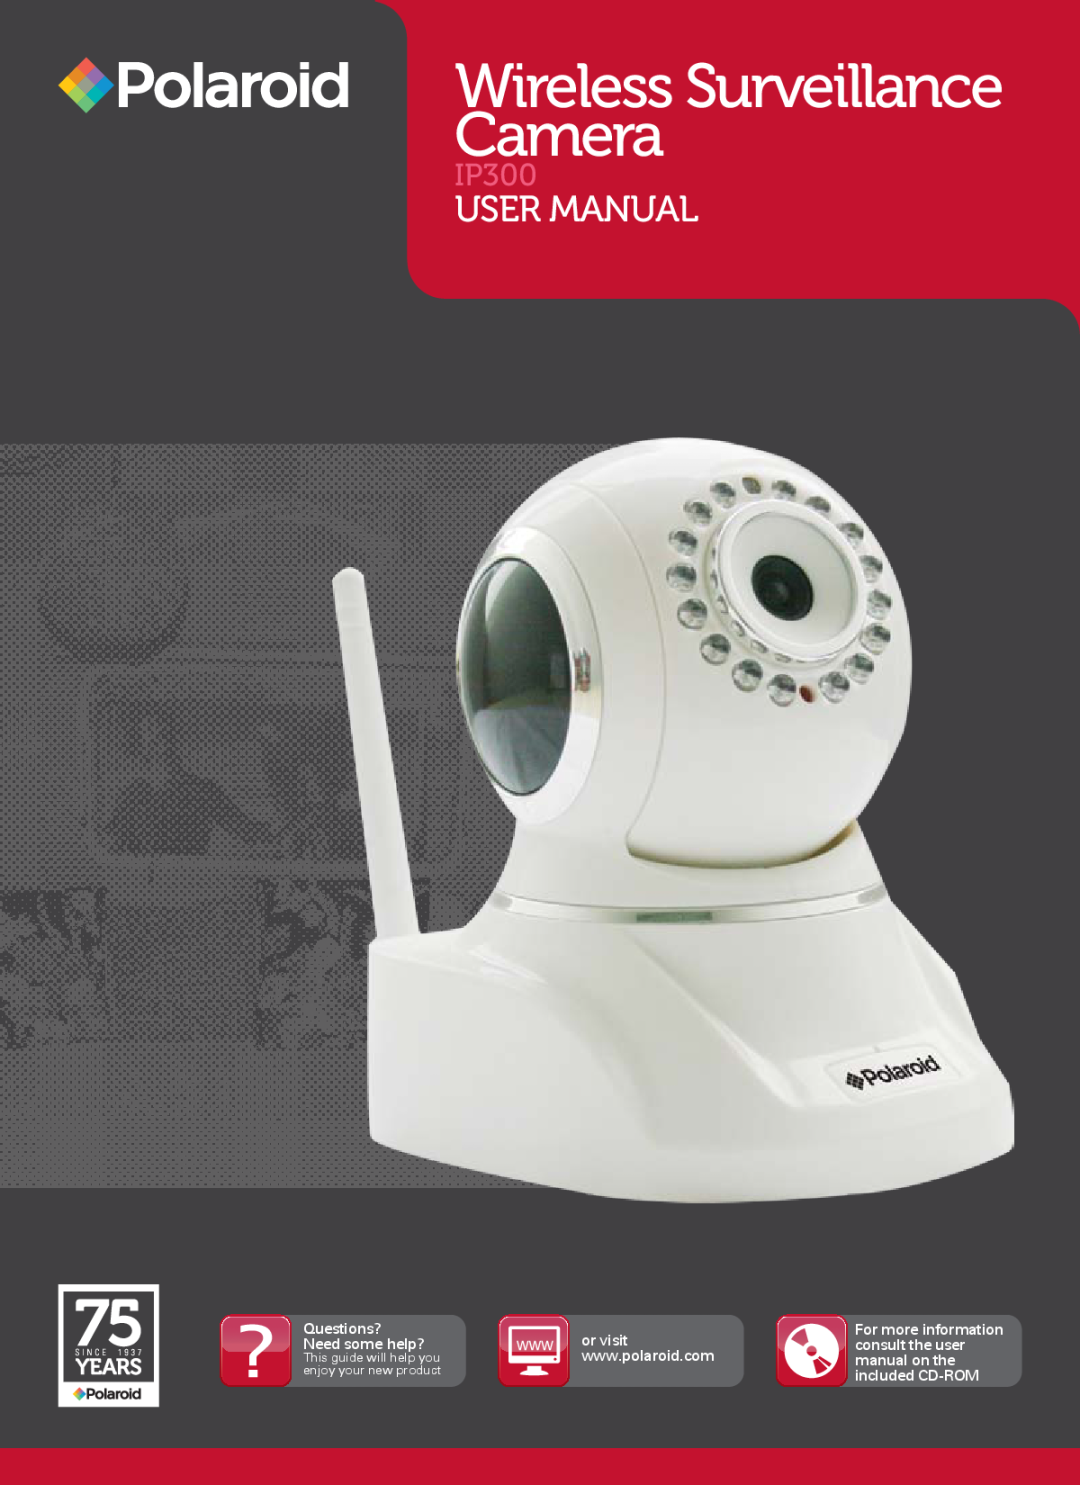 Polaroid Wireless Surveillance Camera user manual User Manual, IP300, Questions? Need some help? 